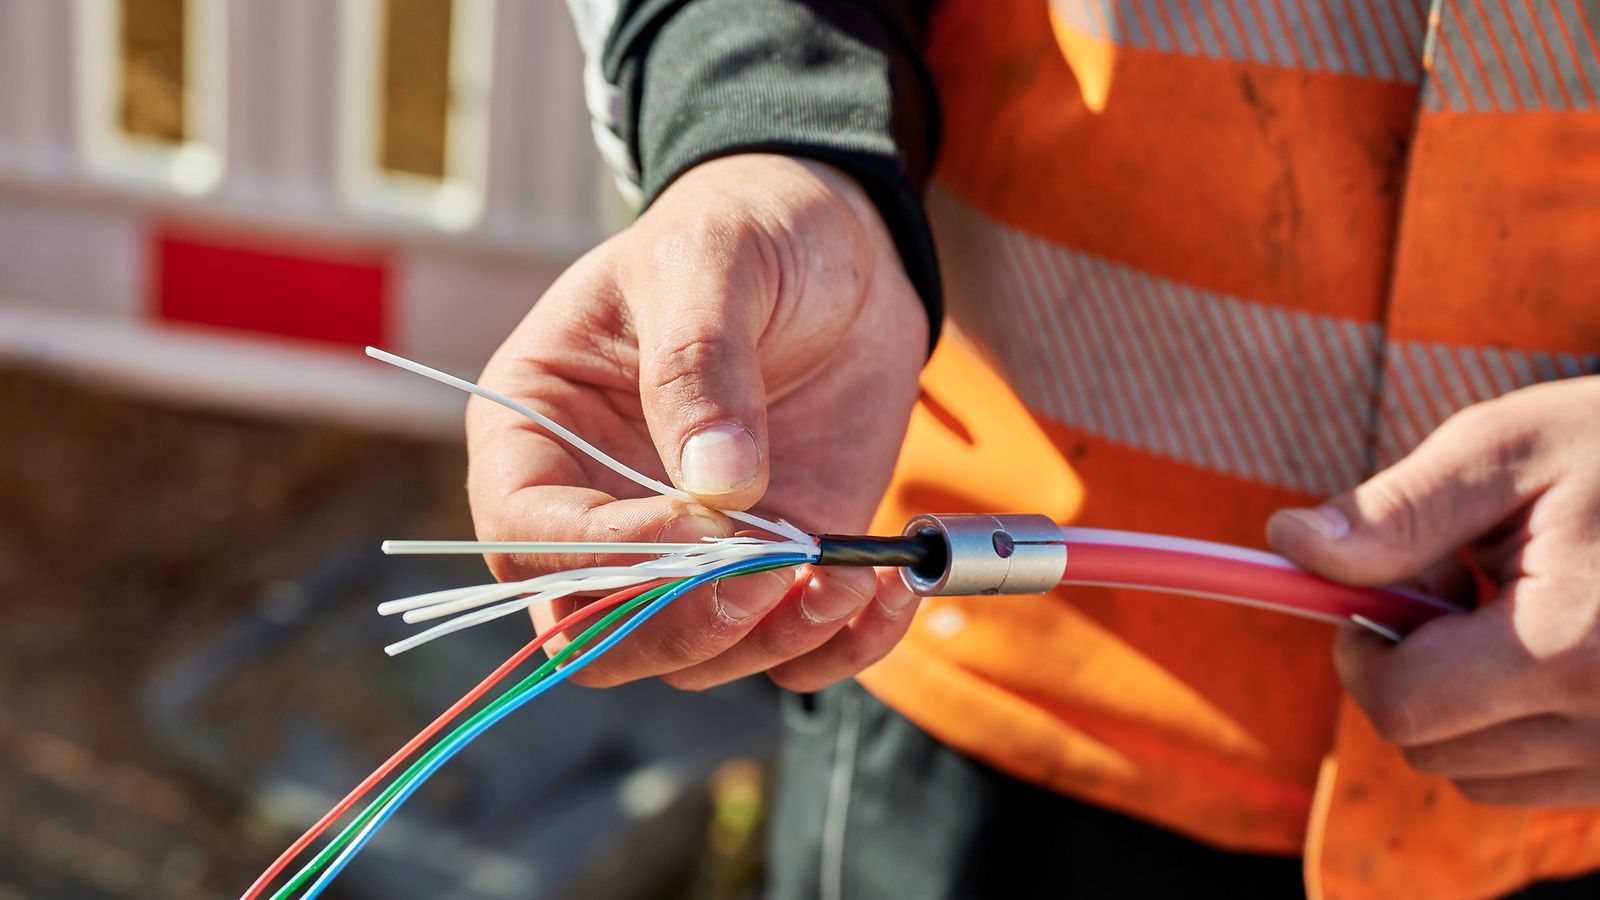 A construction worker with a fiber optic cable in his hand